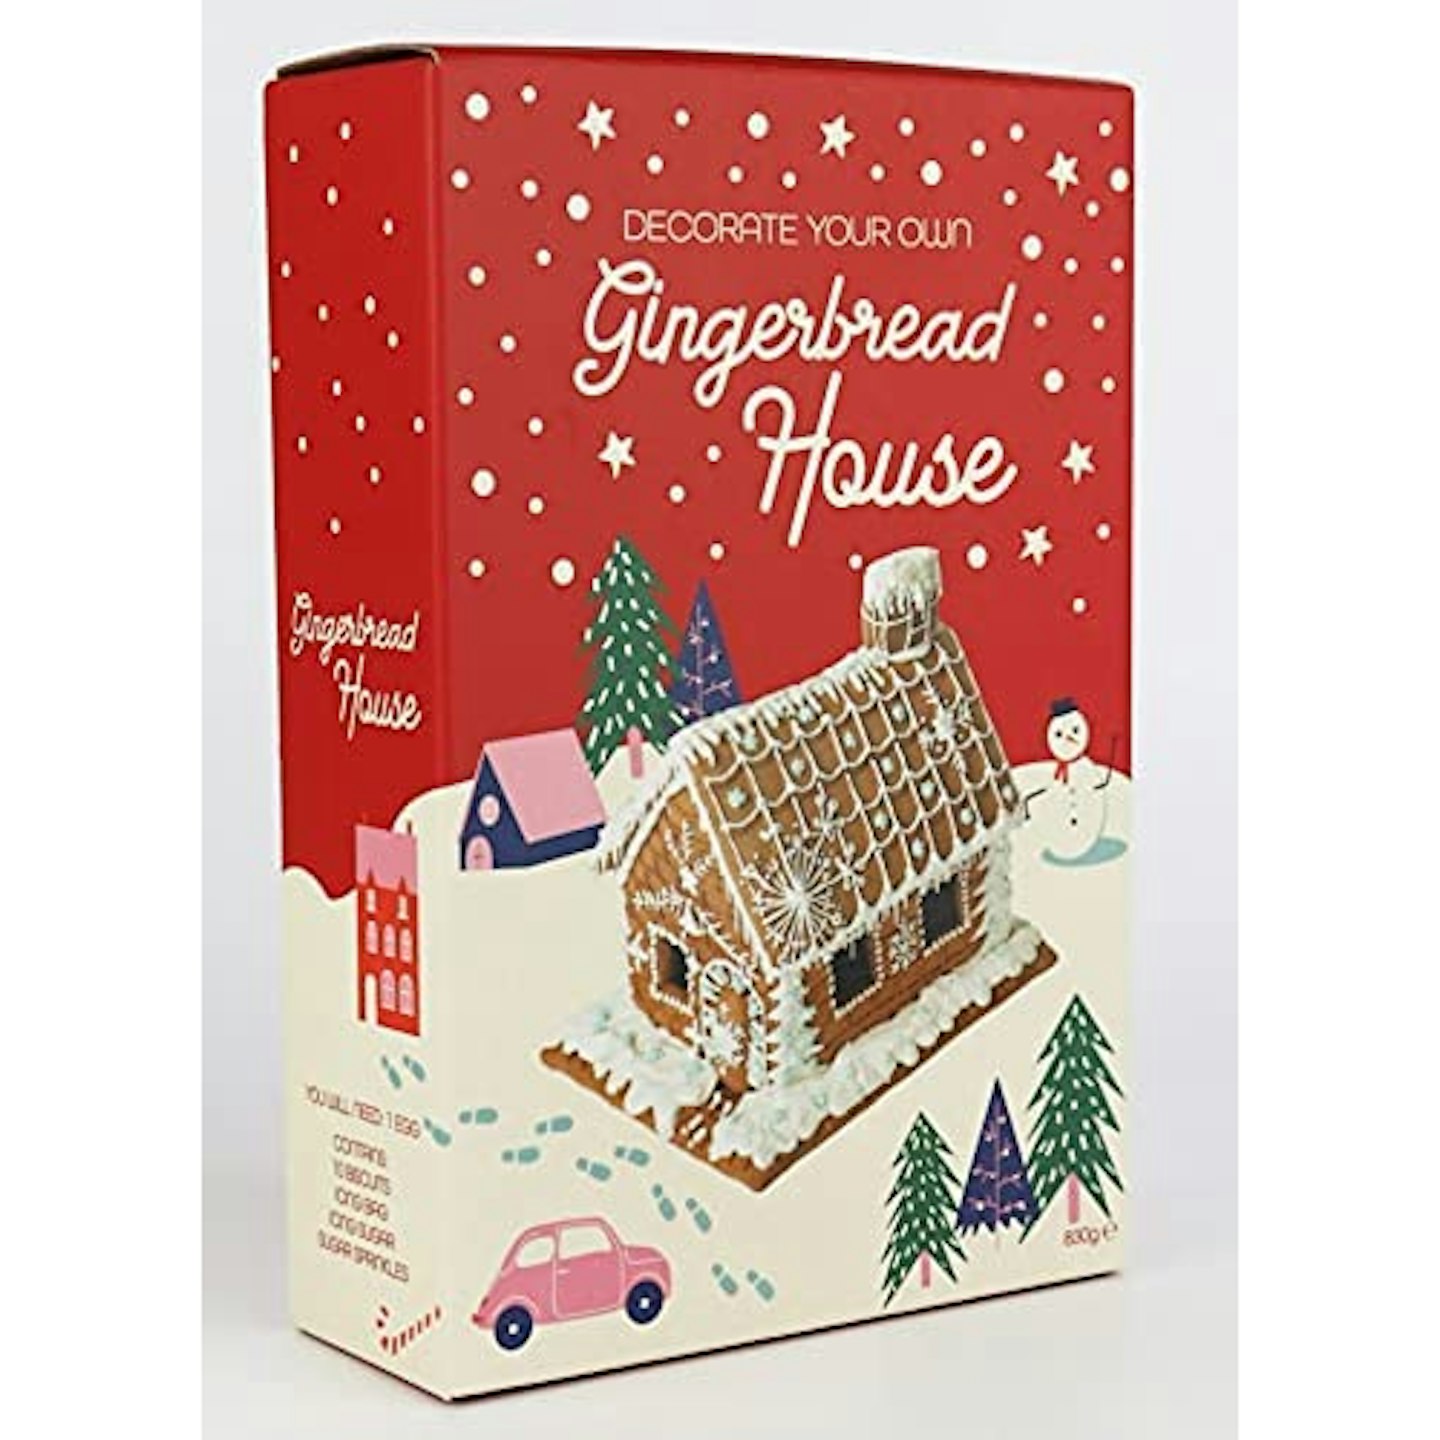 Build and Decorate Your Own Gingerbread House Kit